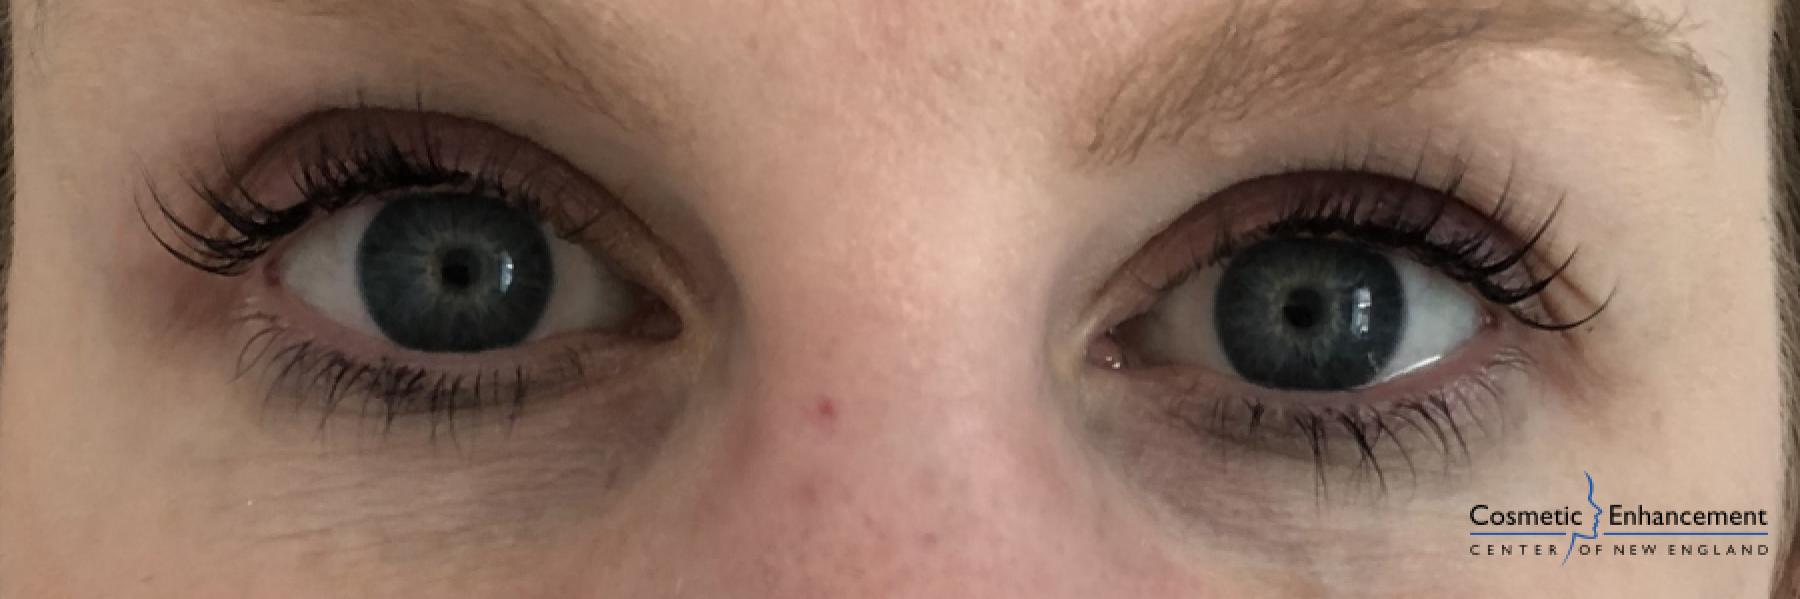 Lash Lift And Tint: Patient 2 - After 1